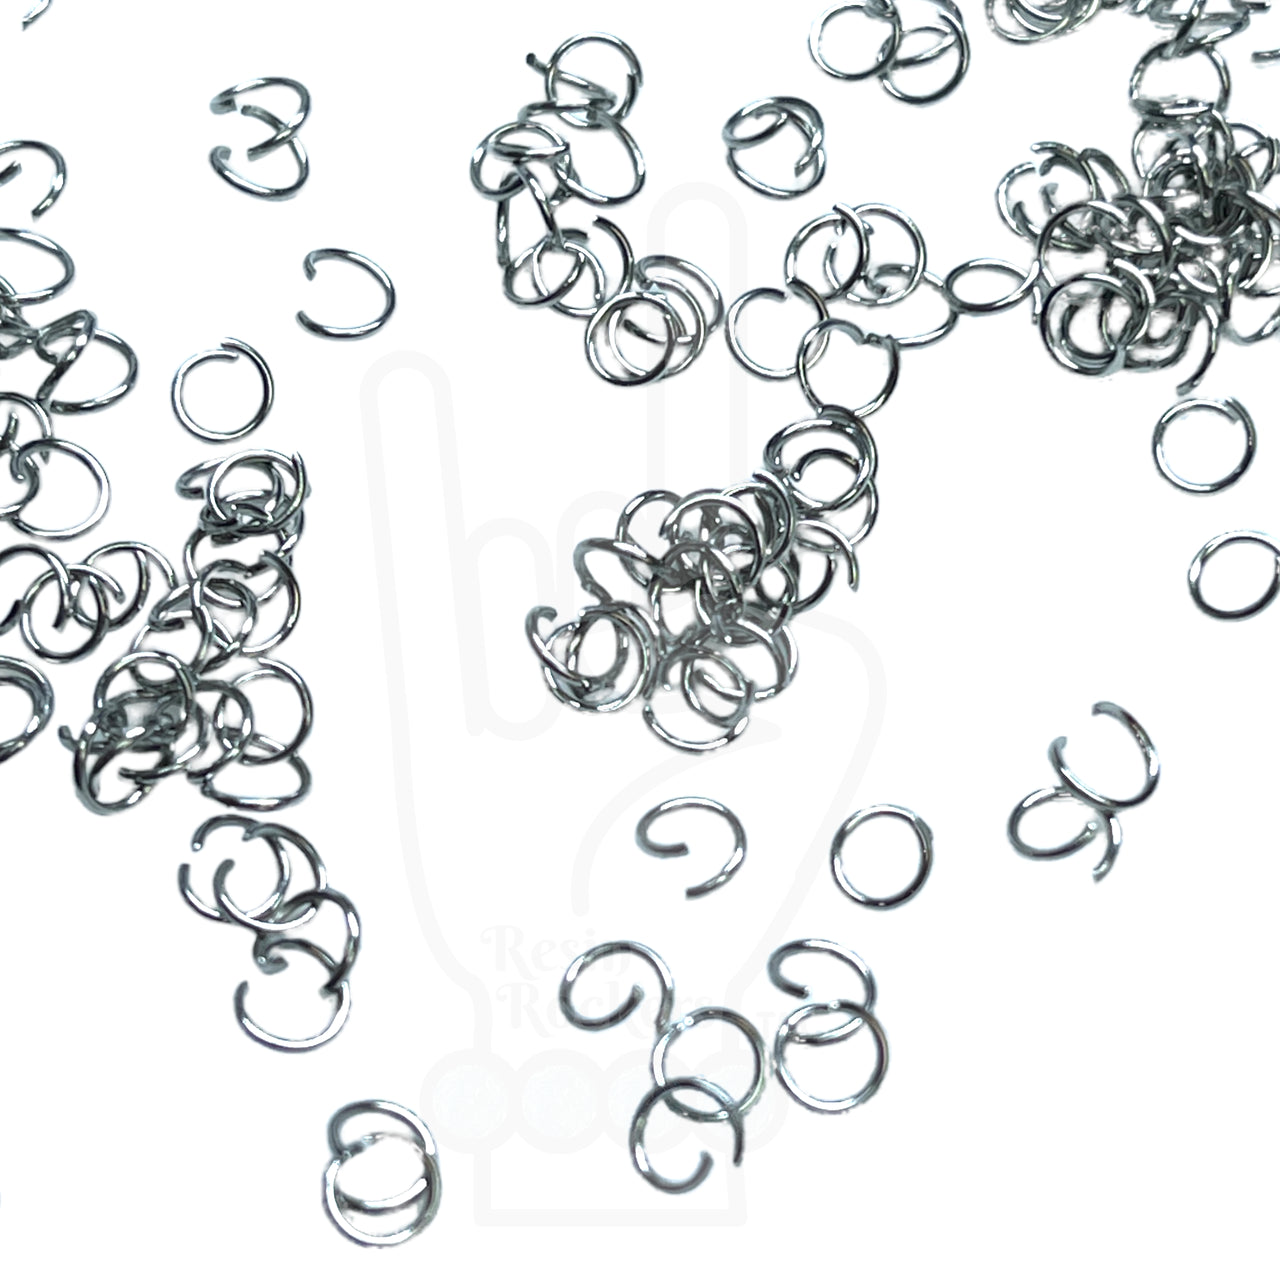 5mm Stainless Steel Jump Rings for Dangle Earrings  (approx. 100)